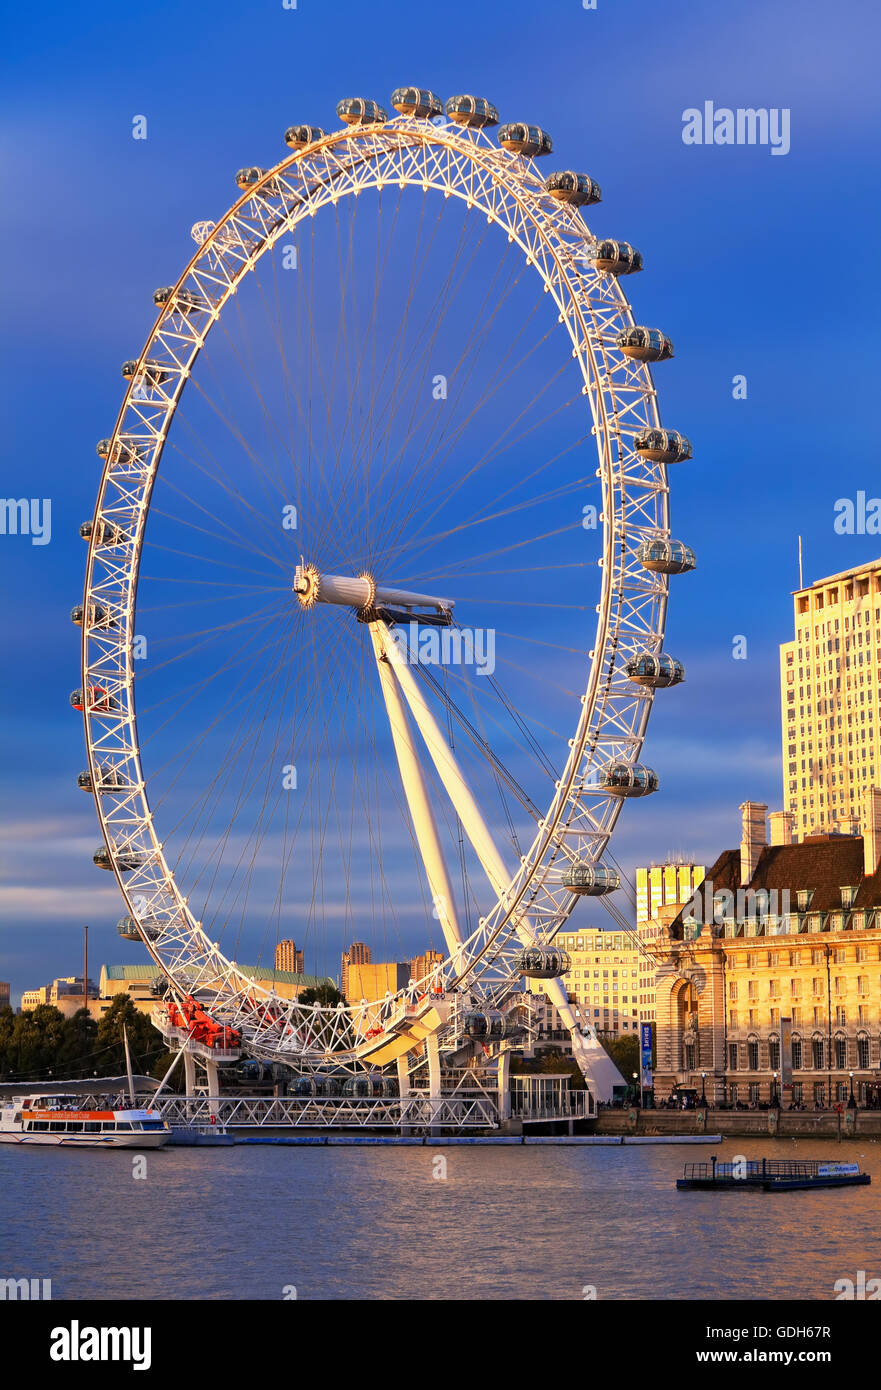 Millennium Wheel, London Eye, River Thames in the foreground, London, England, United Kingdom Stock Photo